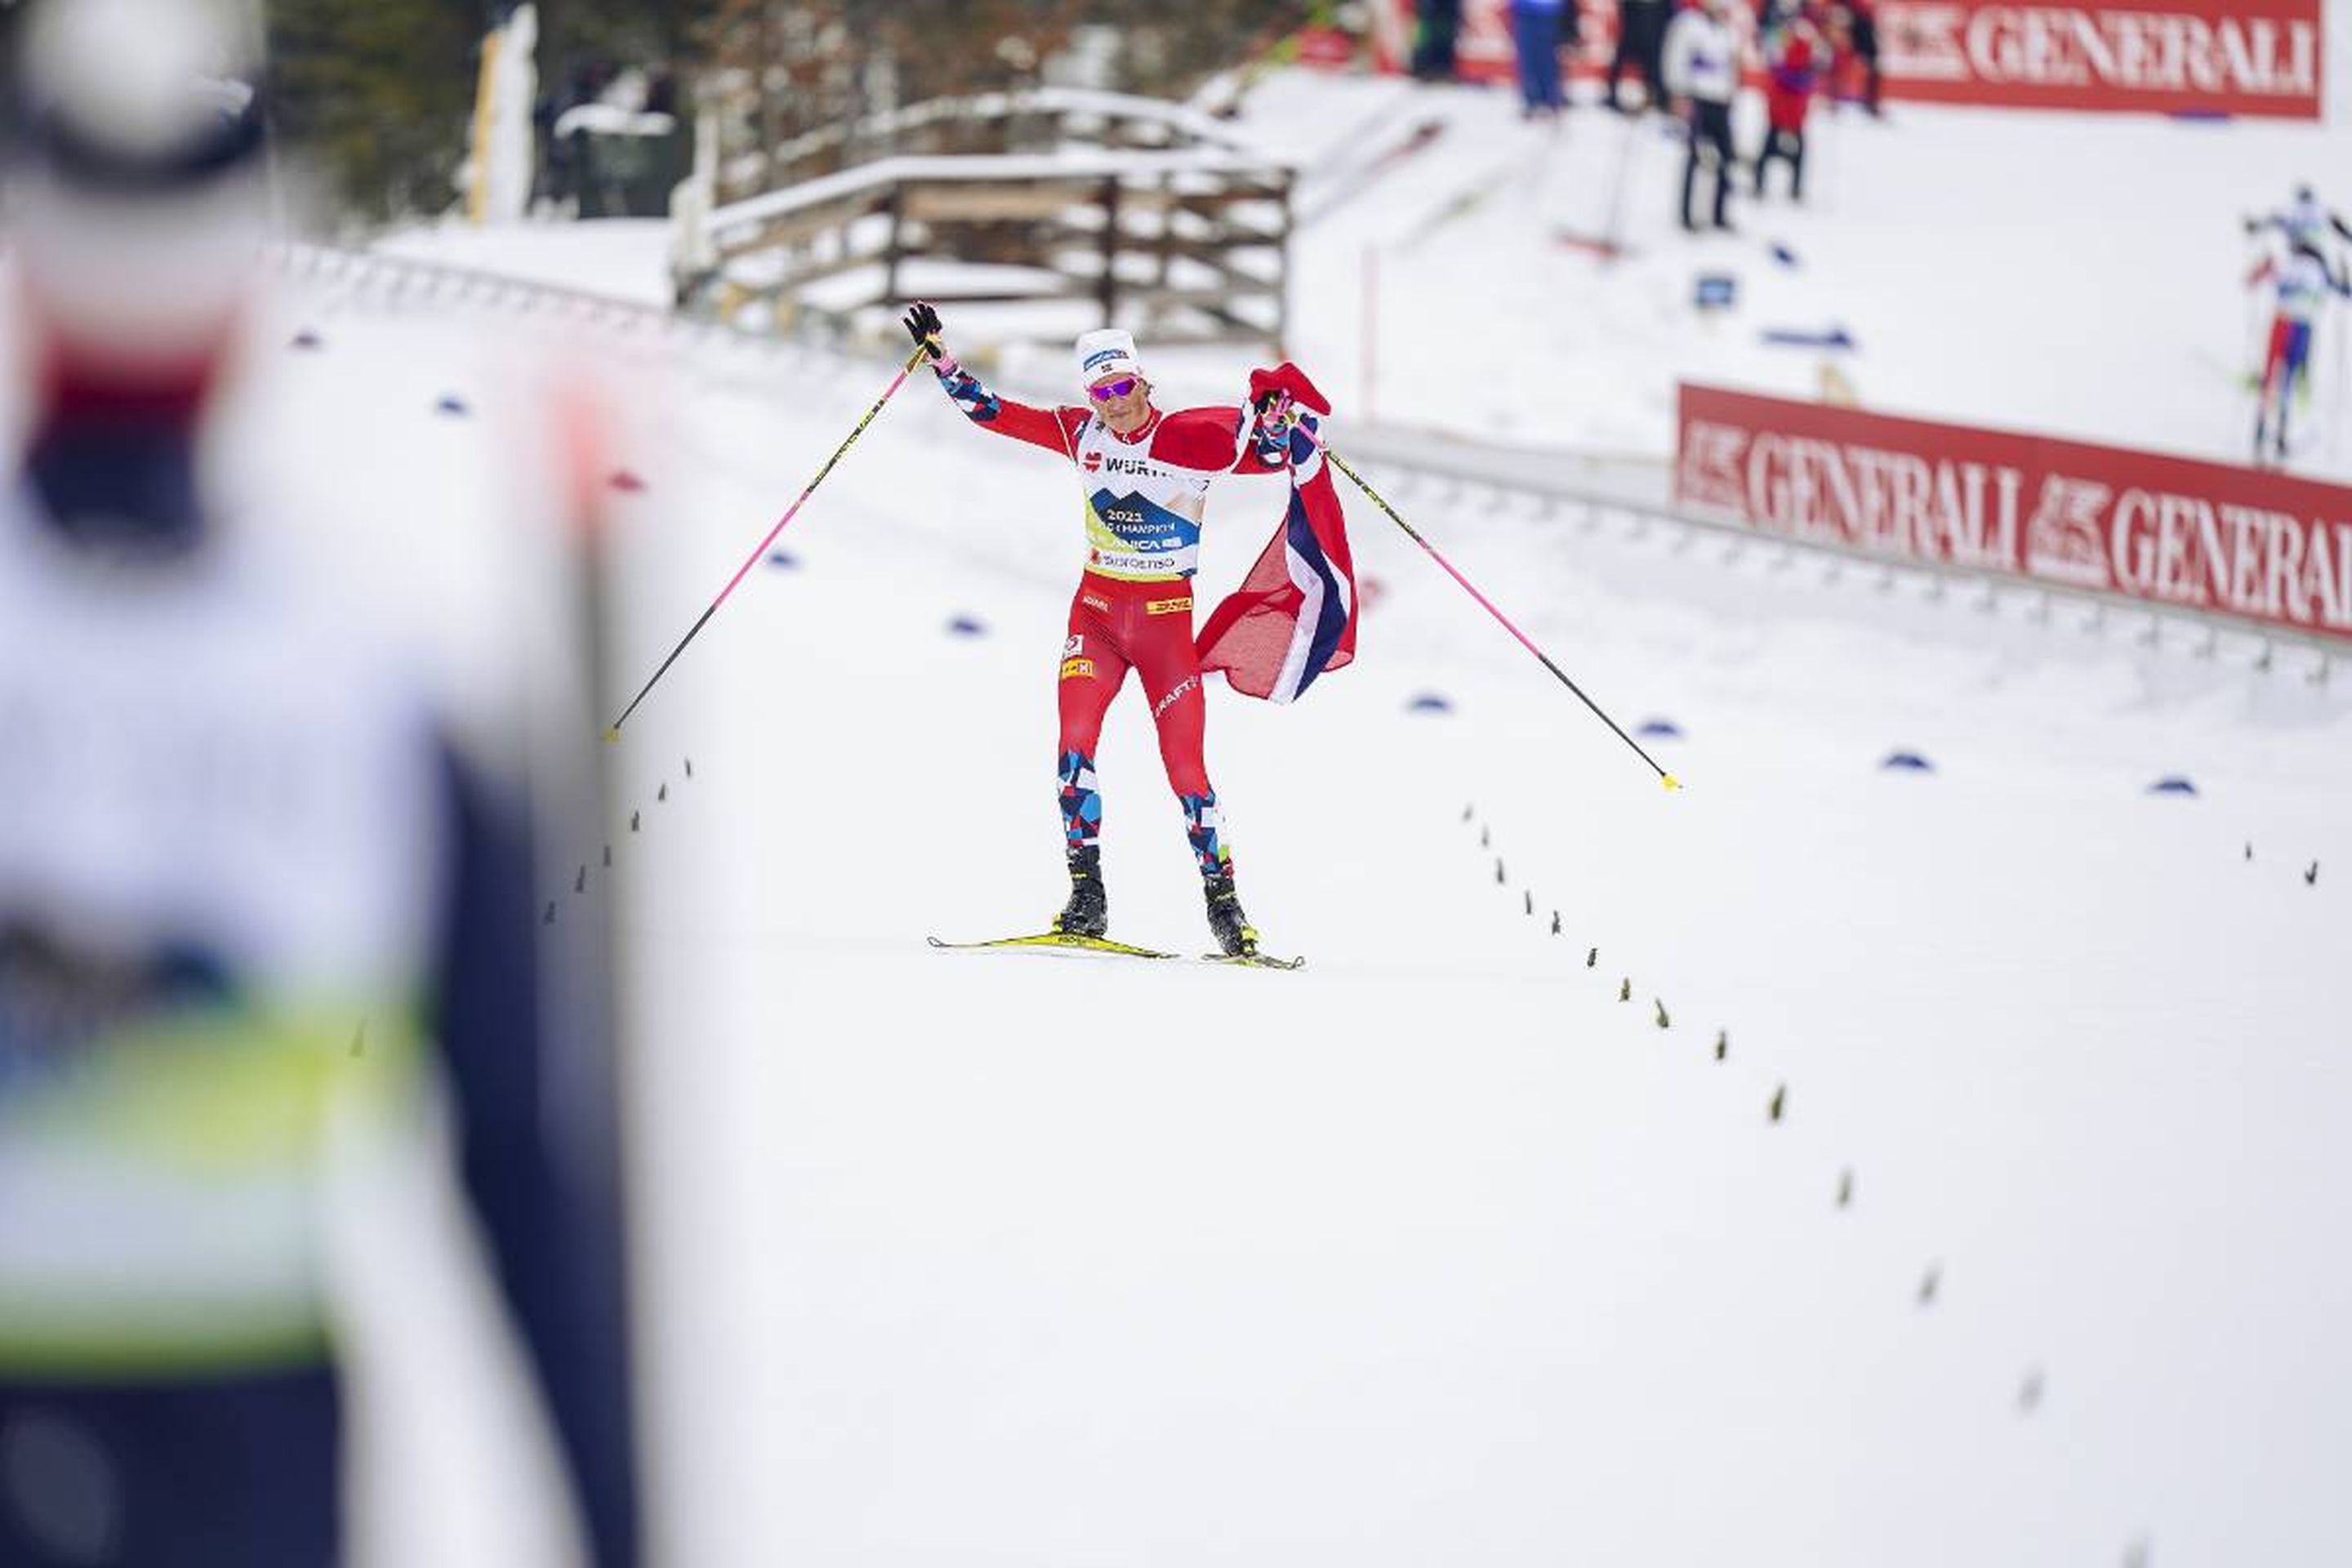 Norway's Johannes Hoesflot Klaebo celebrates with the Norwegian flag on the home straight: @Nordic Focus.